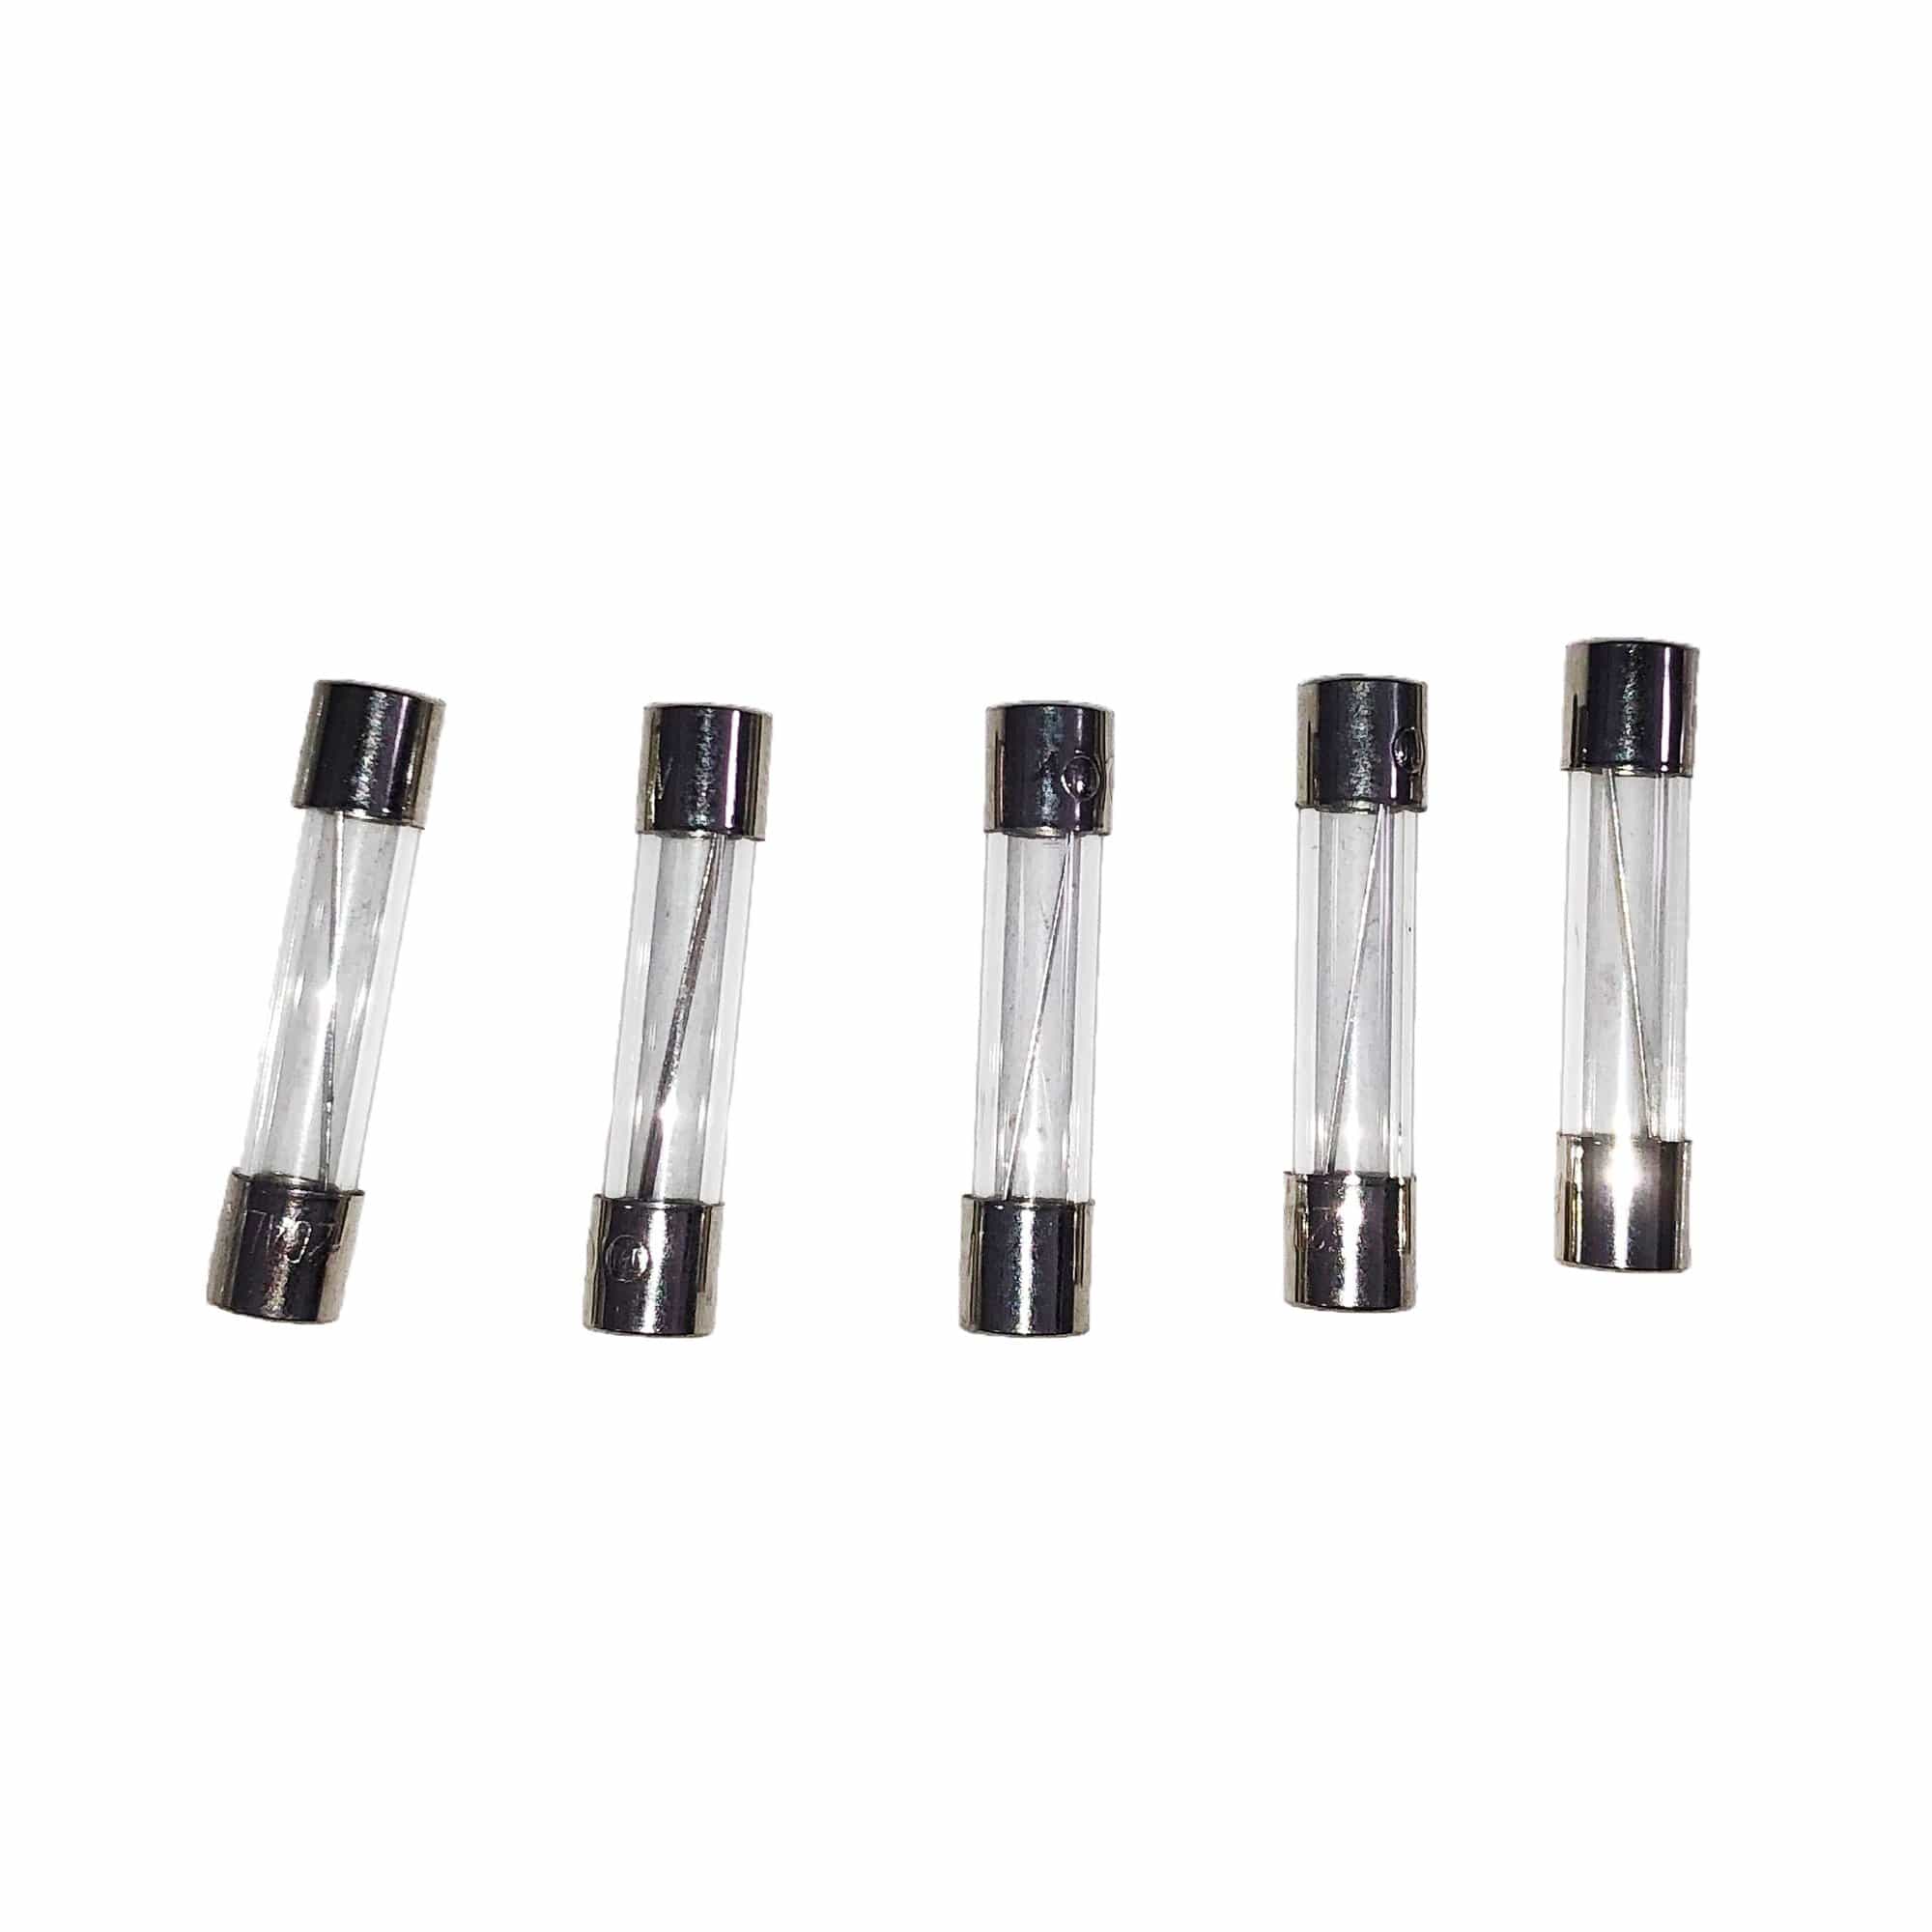 PowerBright F30A 30 Amp Glass Fuse 5 Pack